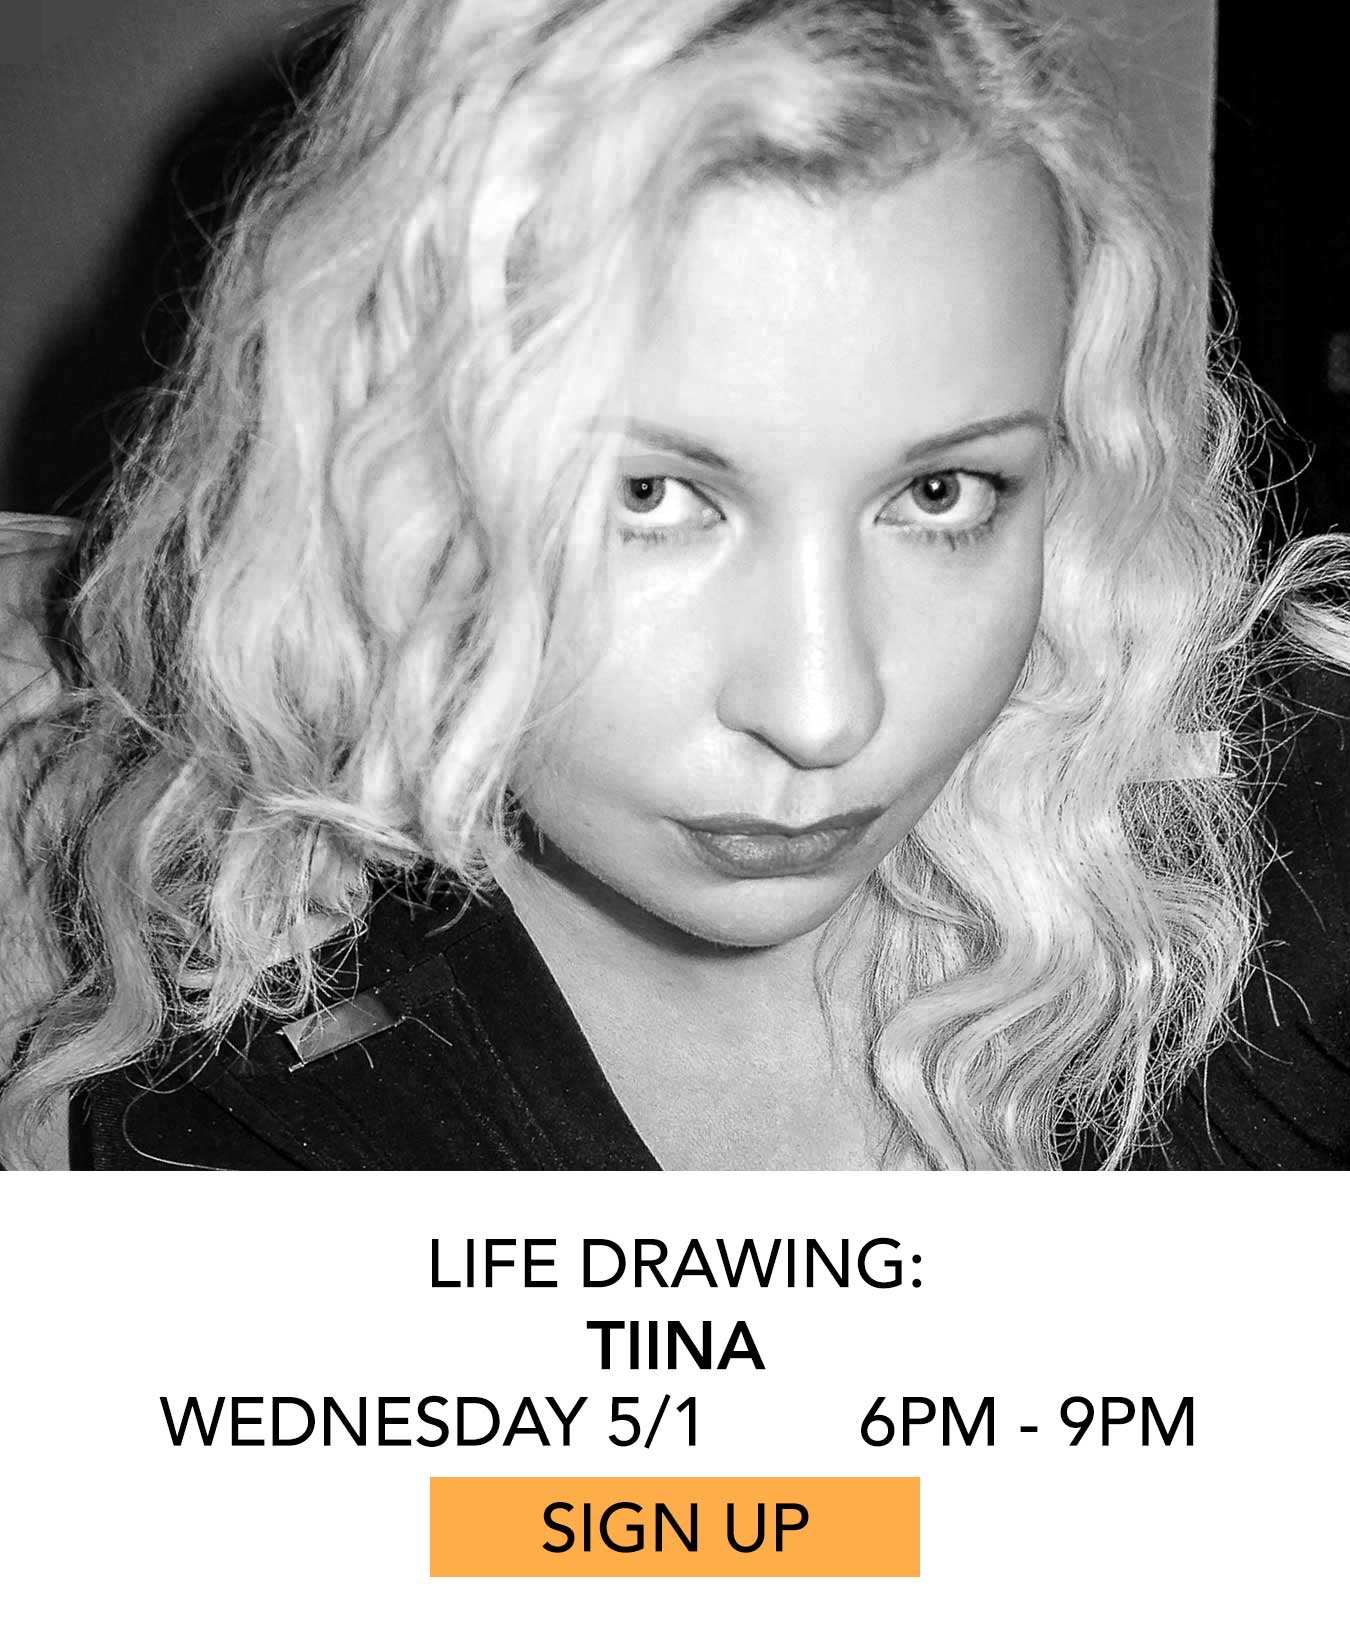 Life Drawing: Tiina. Wednesday 5/1 from 6pm to 9pm. Click to Sign Up.